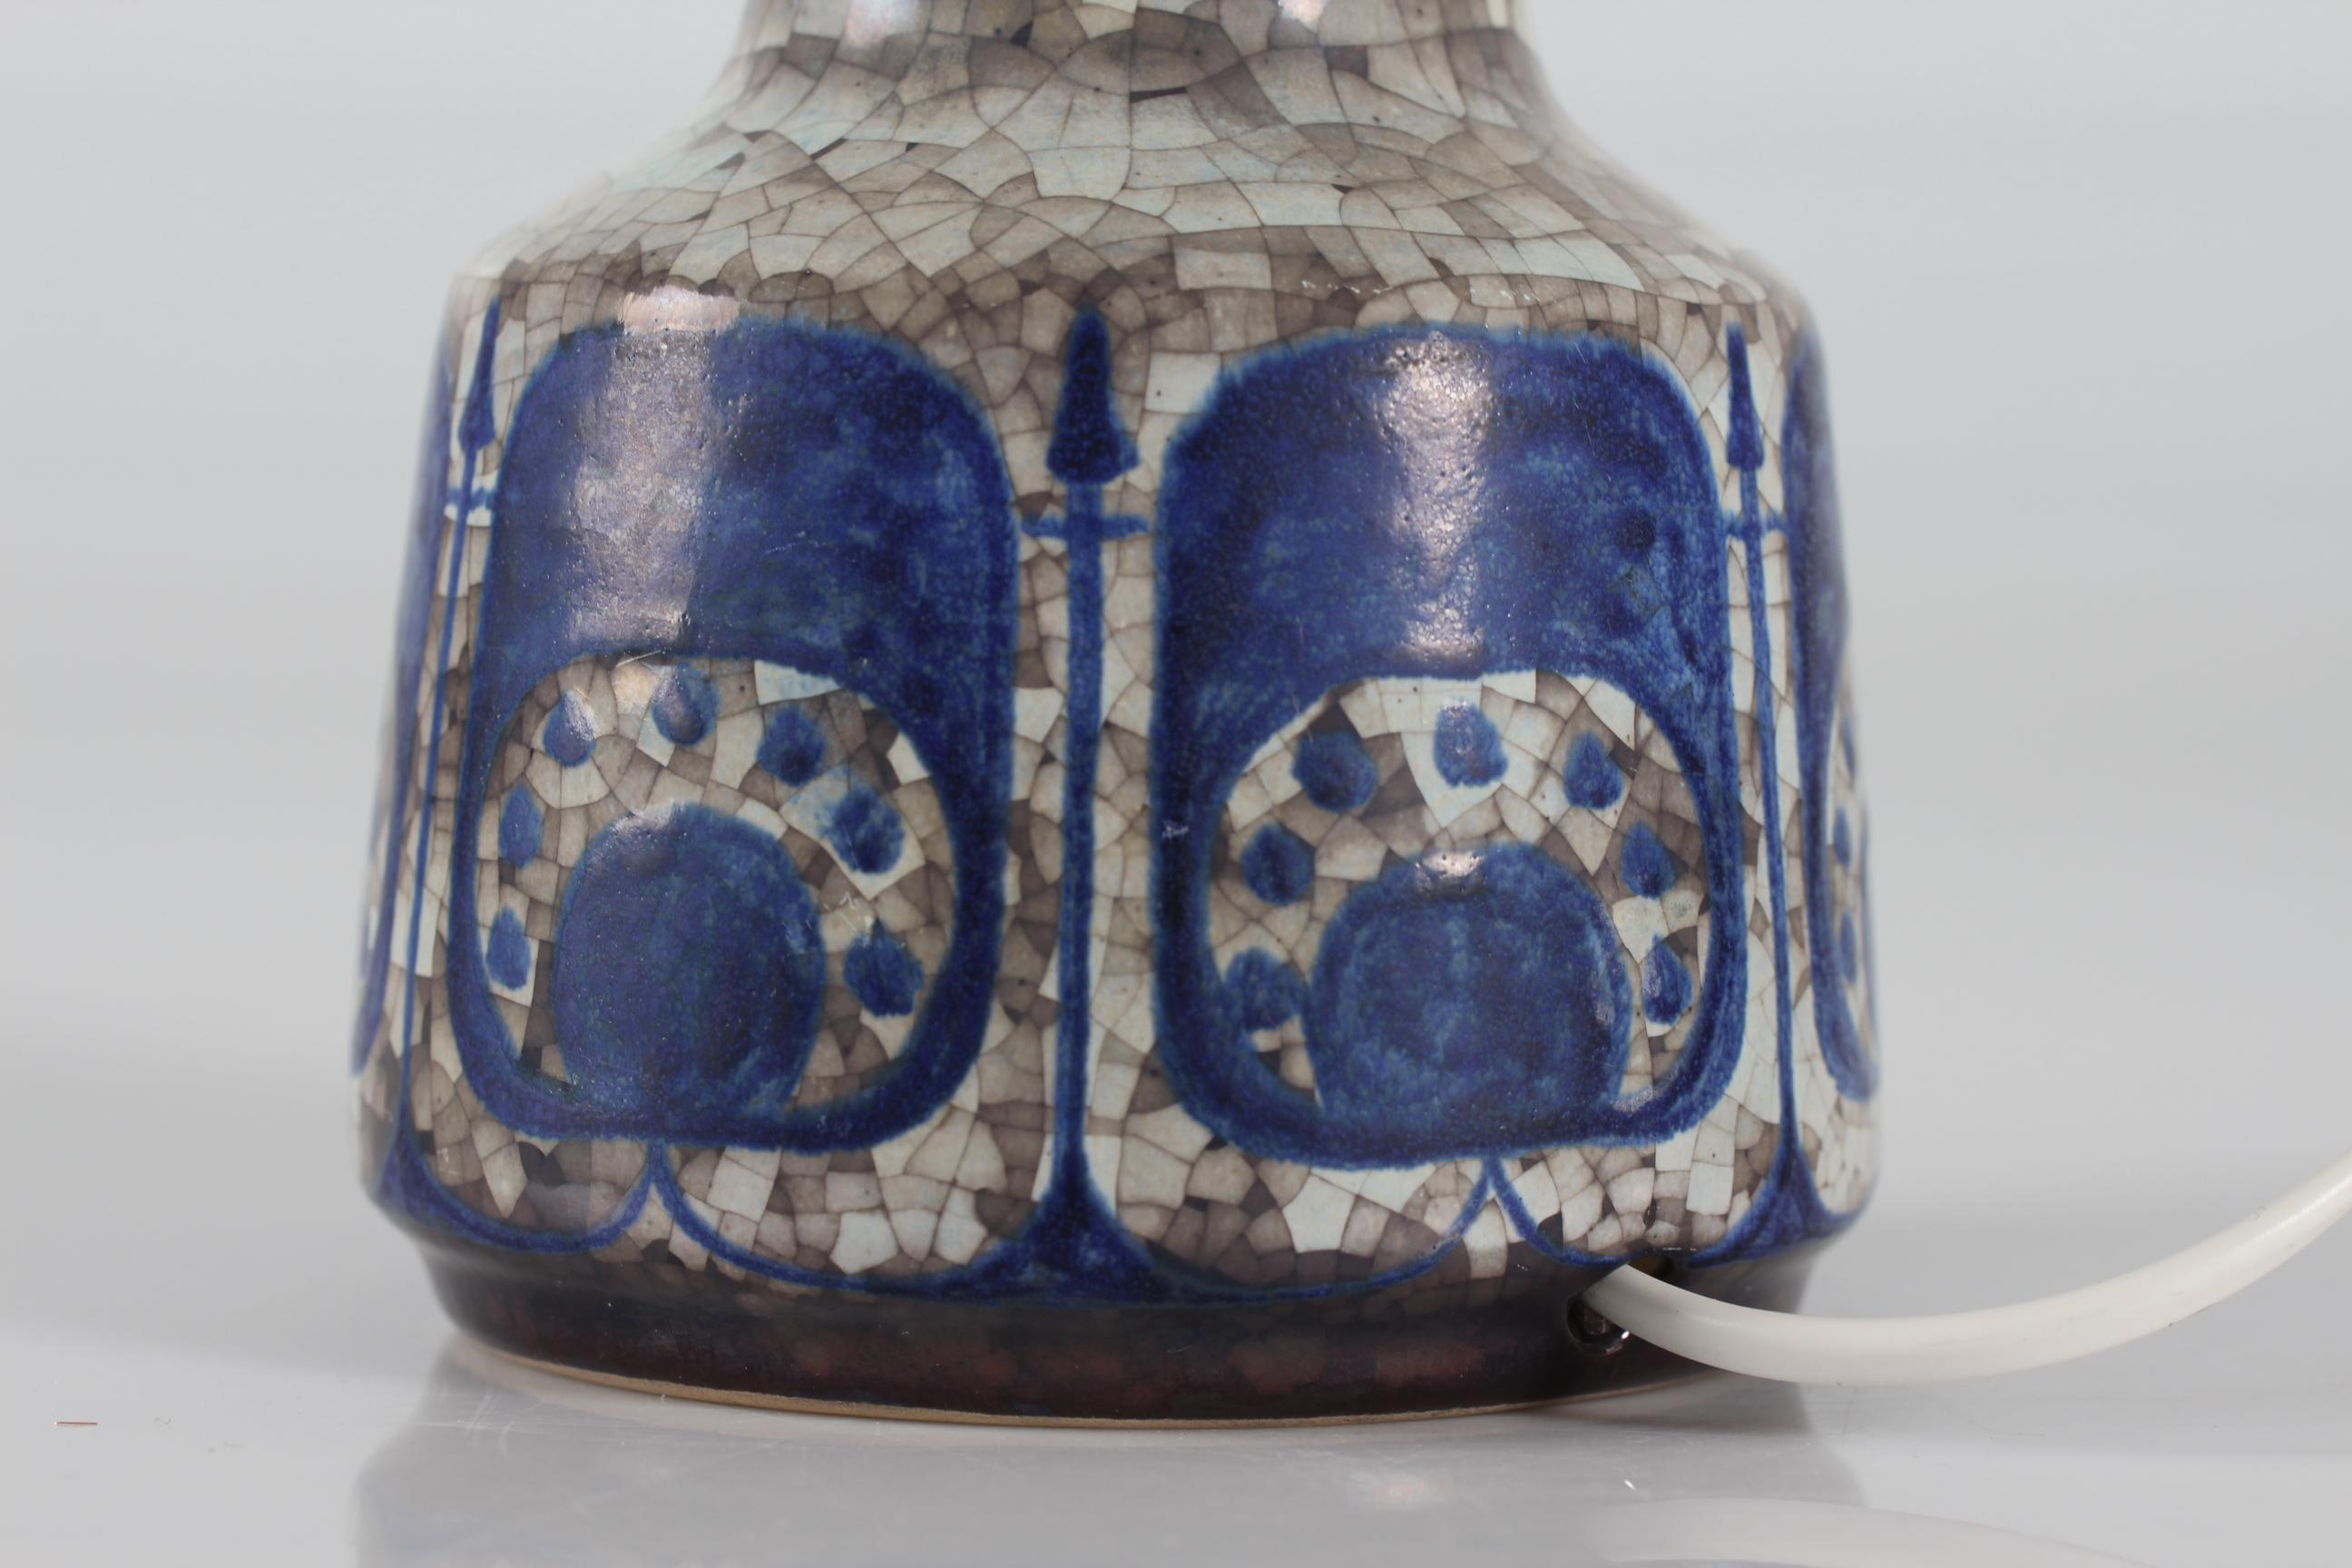 Danish Medium Table Lamp by Marianne Starck for Michael Andersen Blue Persia Glaze 1960 For Sale